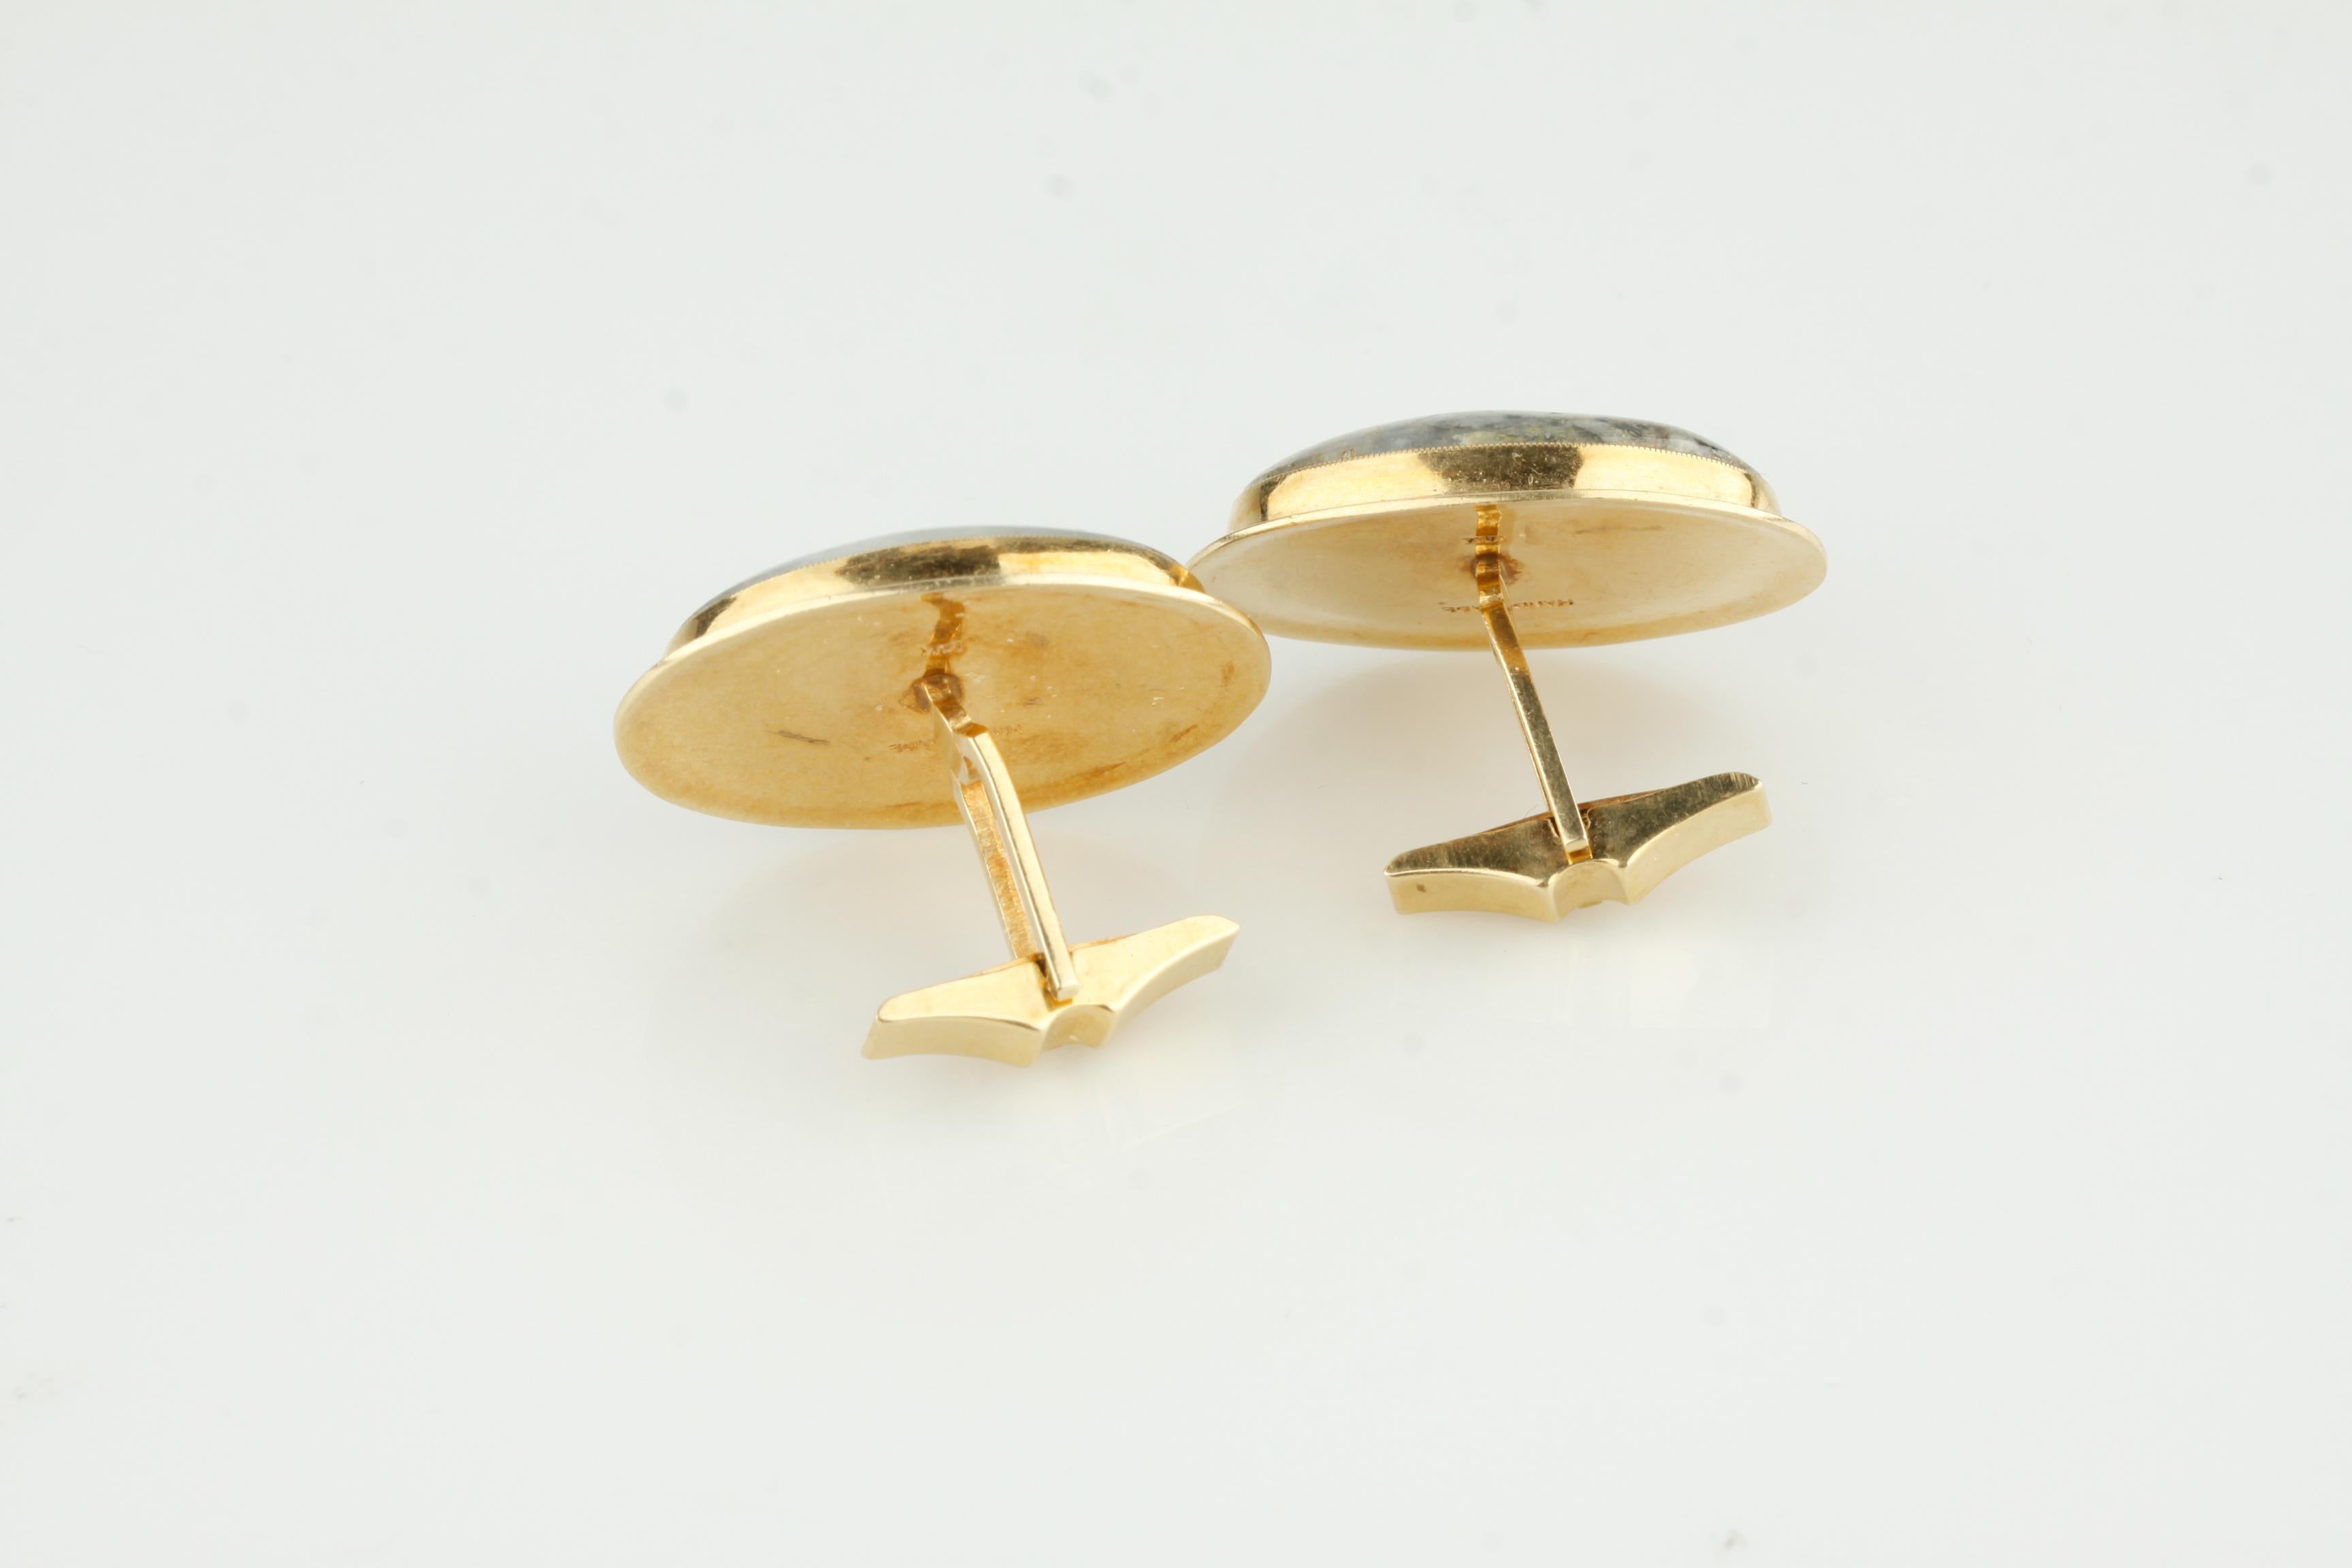 Gorgeous Rock Crystal Cabochons in 14k Yellow Gold Cufflinks
Approximate Dimensions of Rock Crystal = 24 mm x 18 mm
Approximate Total Weight of Rock Crystals = 39 carats
Dimensions of Cufflink = 29 mm x 23 mm
Total Mass of Cufflinks = 23.15